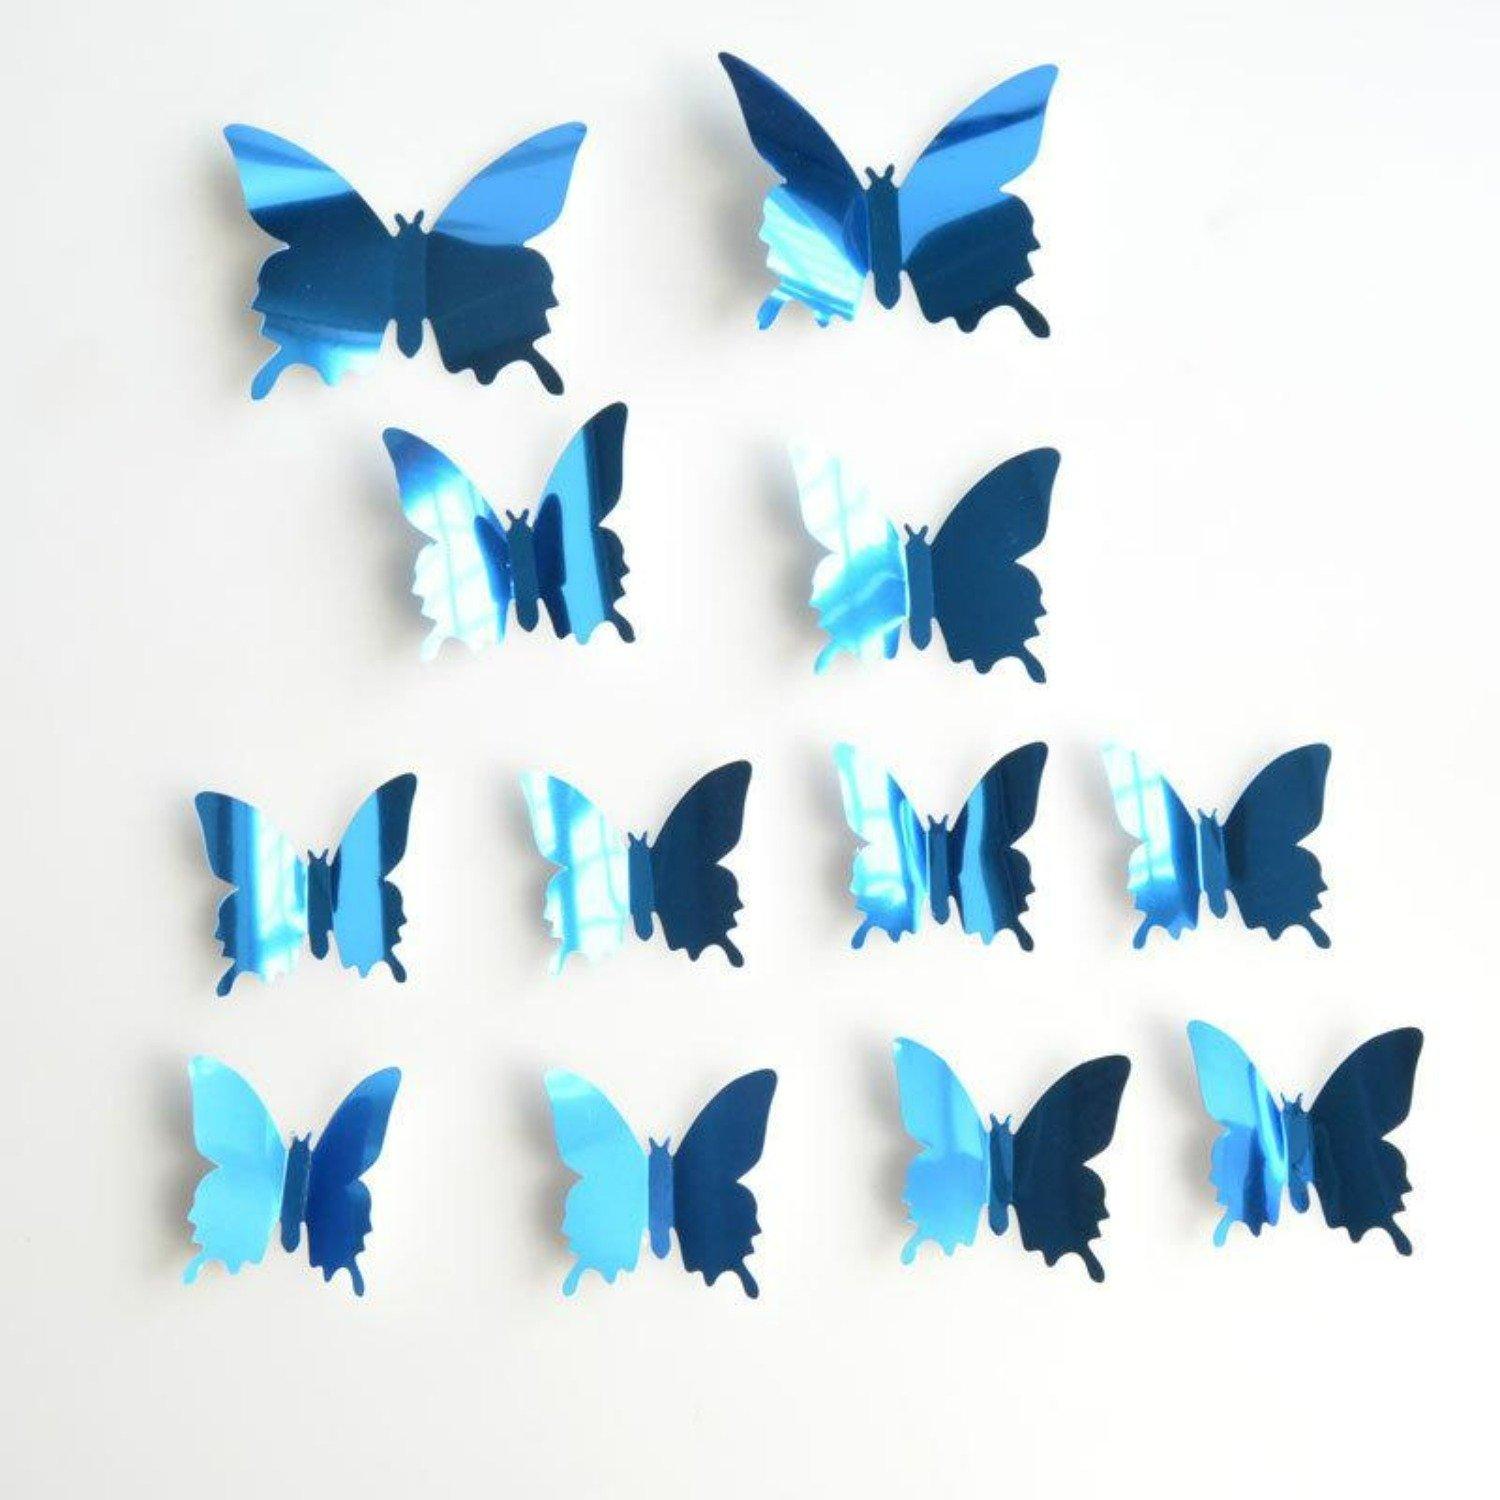 3D Butterfly Acrylic Mirror Home Decal Sticker Pack - StiCool